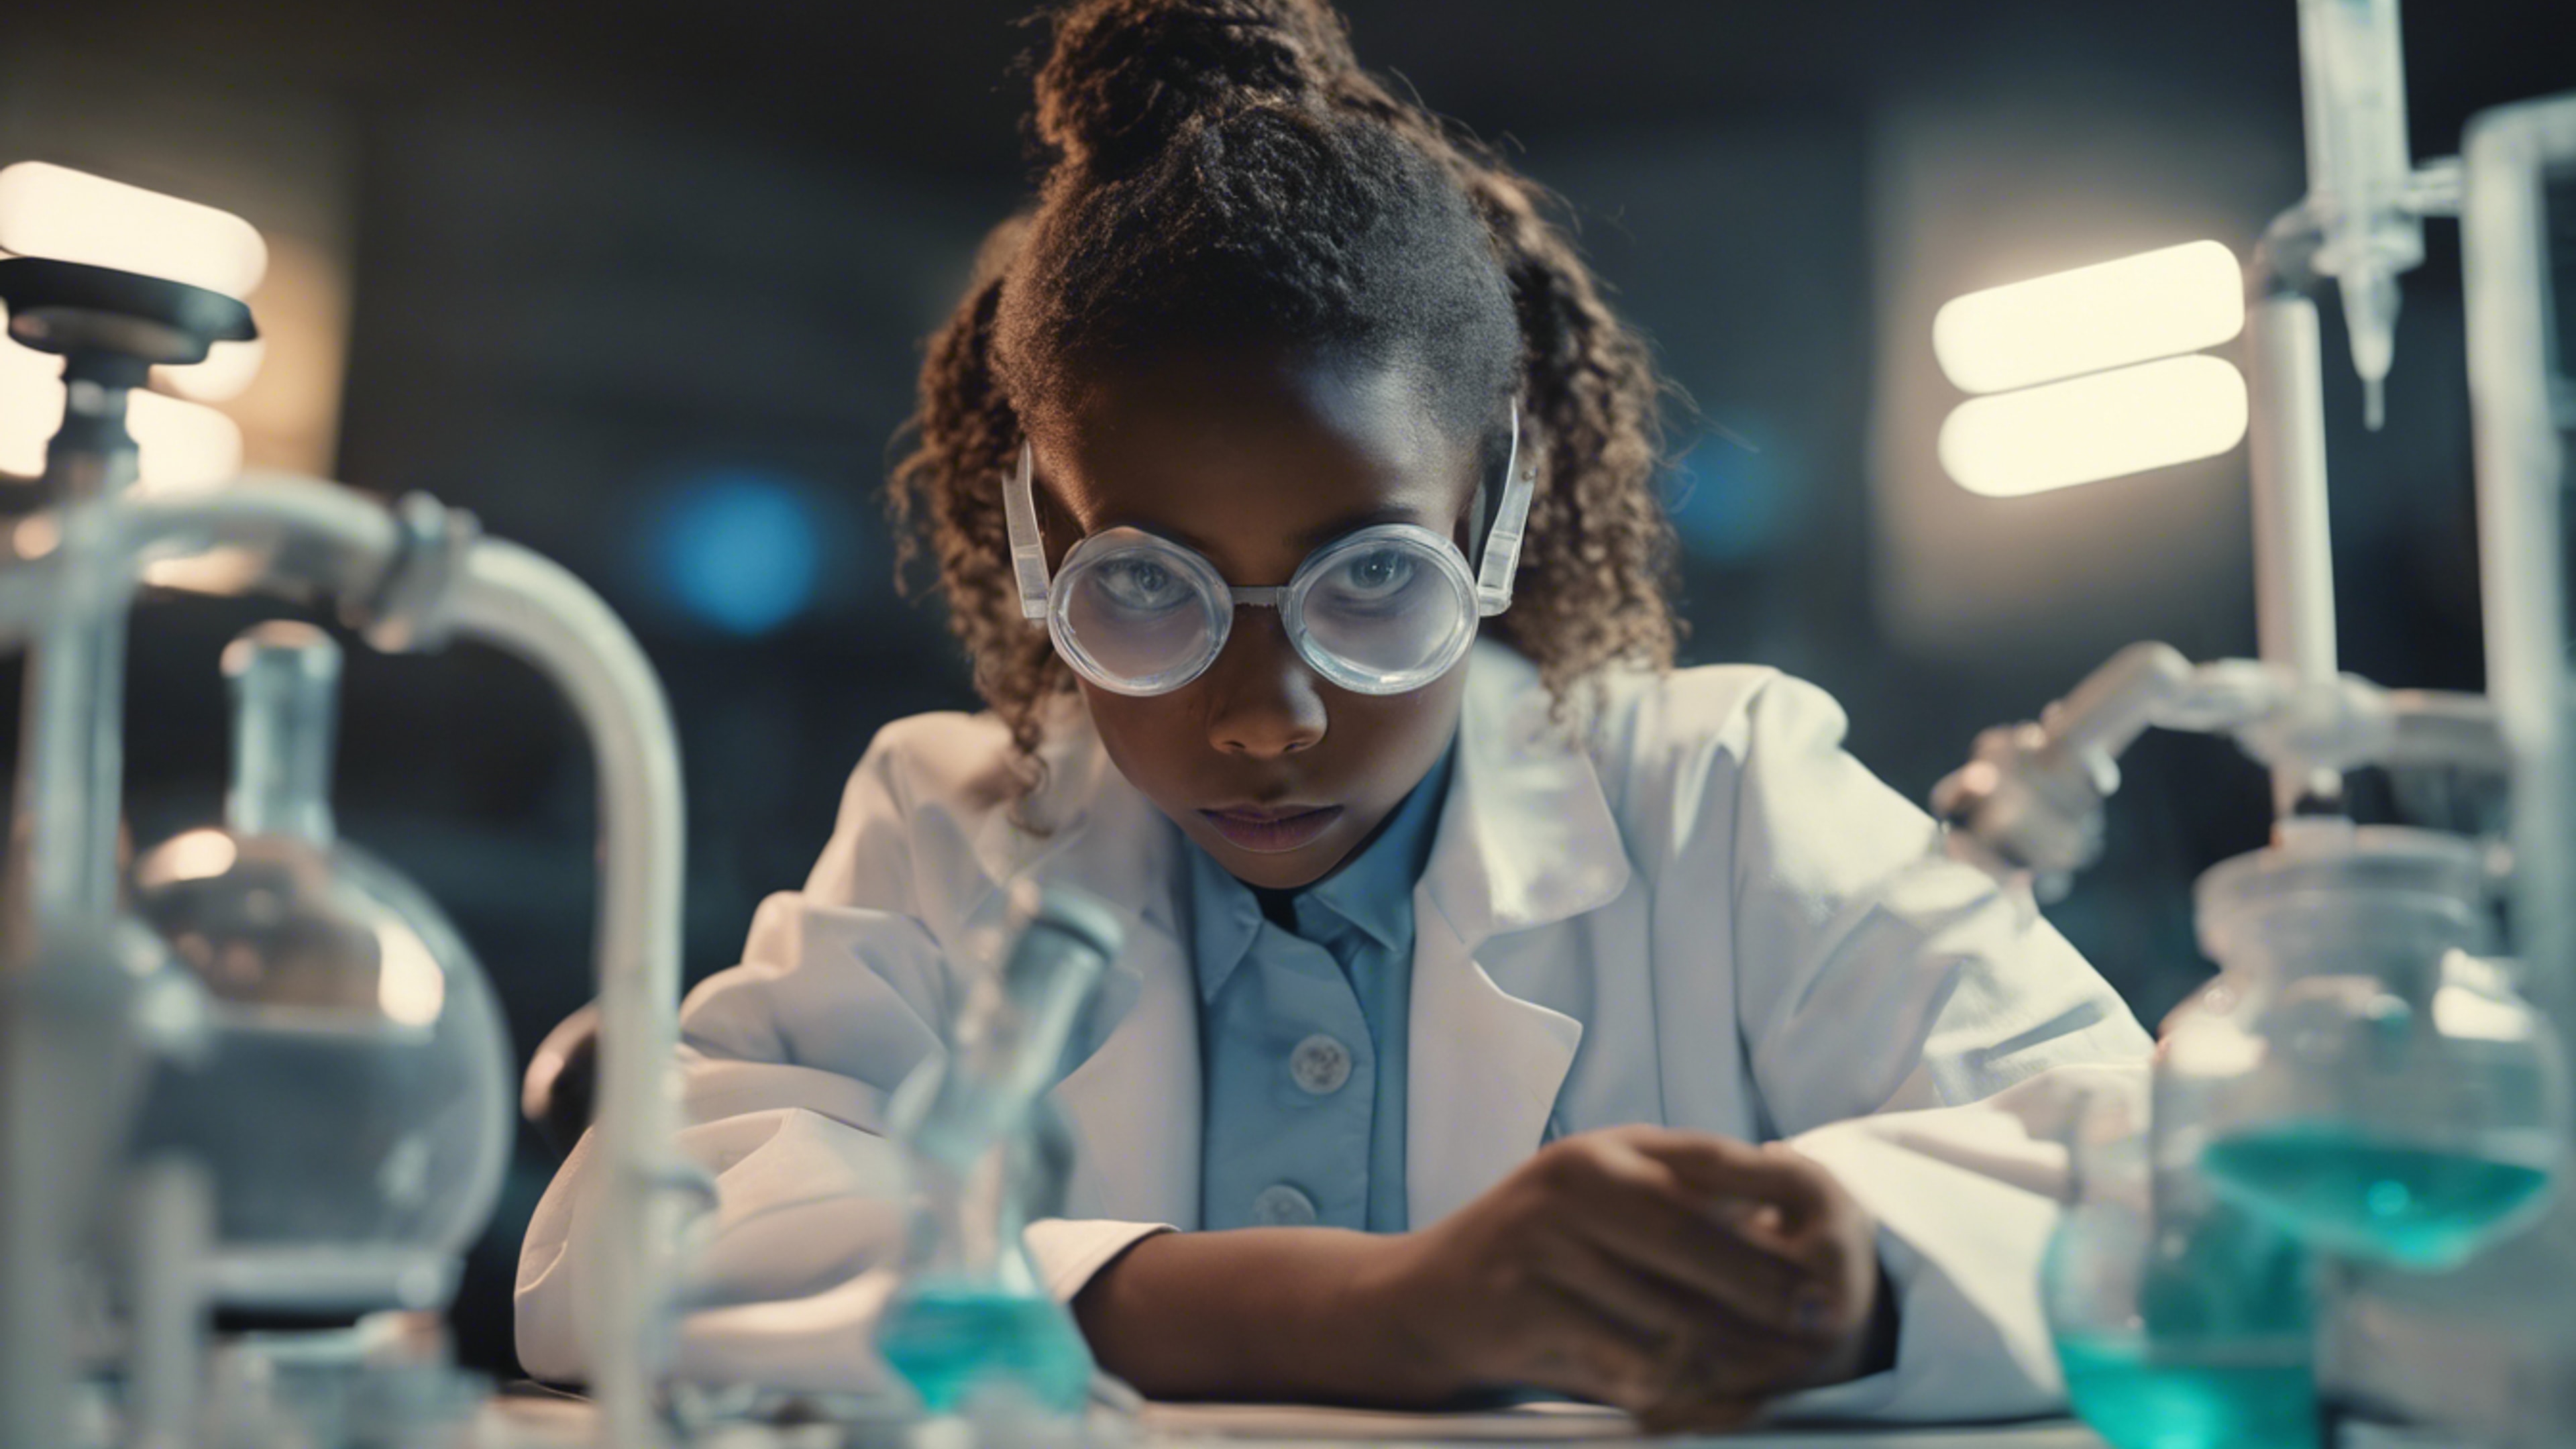 A young black girl wearing goggles and lab coat immersed in doing science experiment. Tapet[448c919503a247f79693]